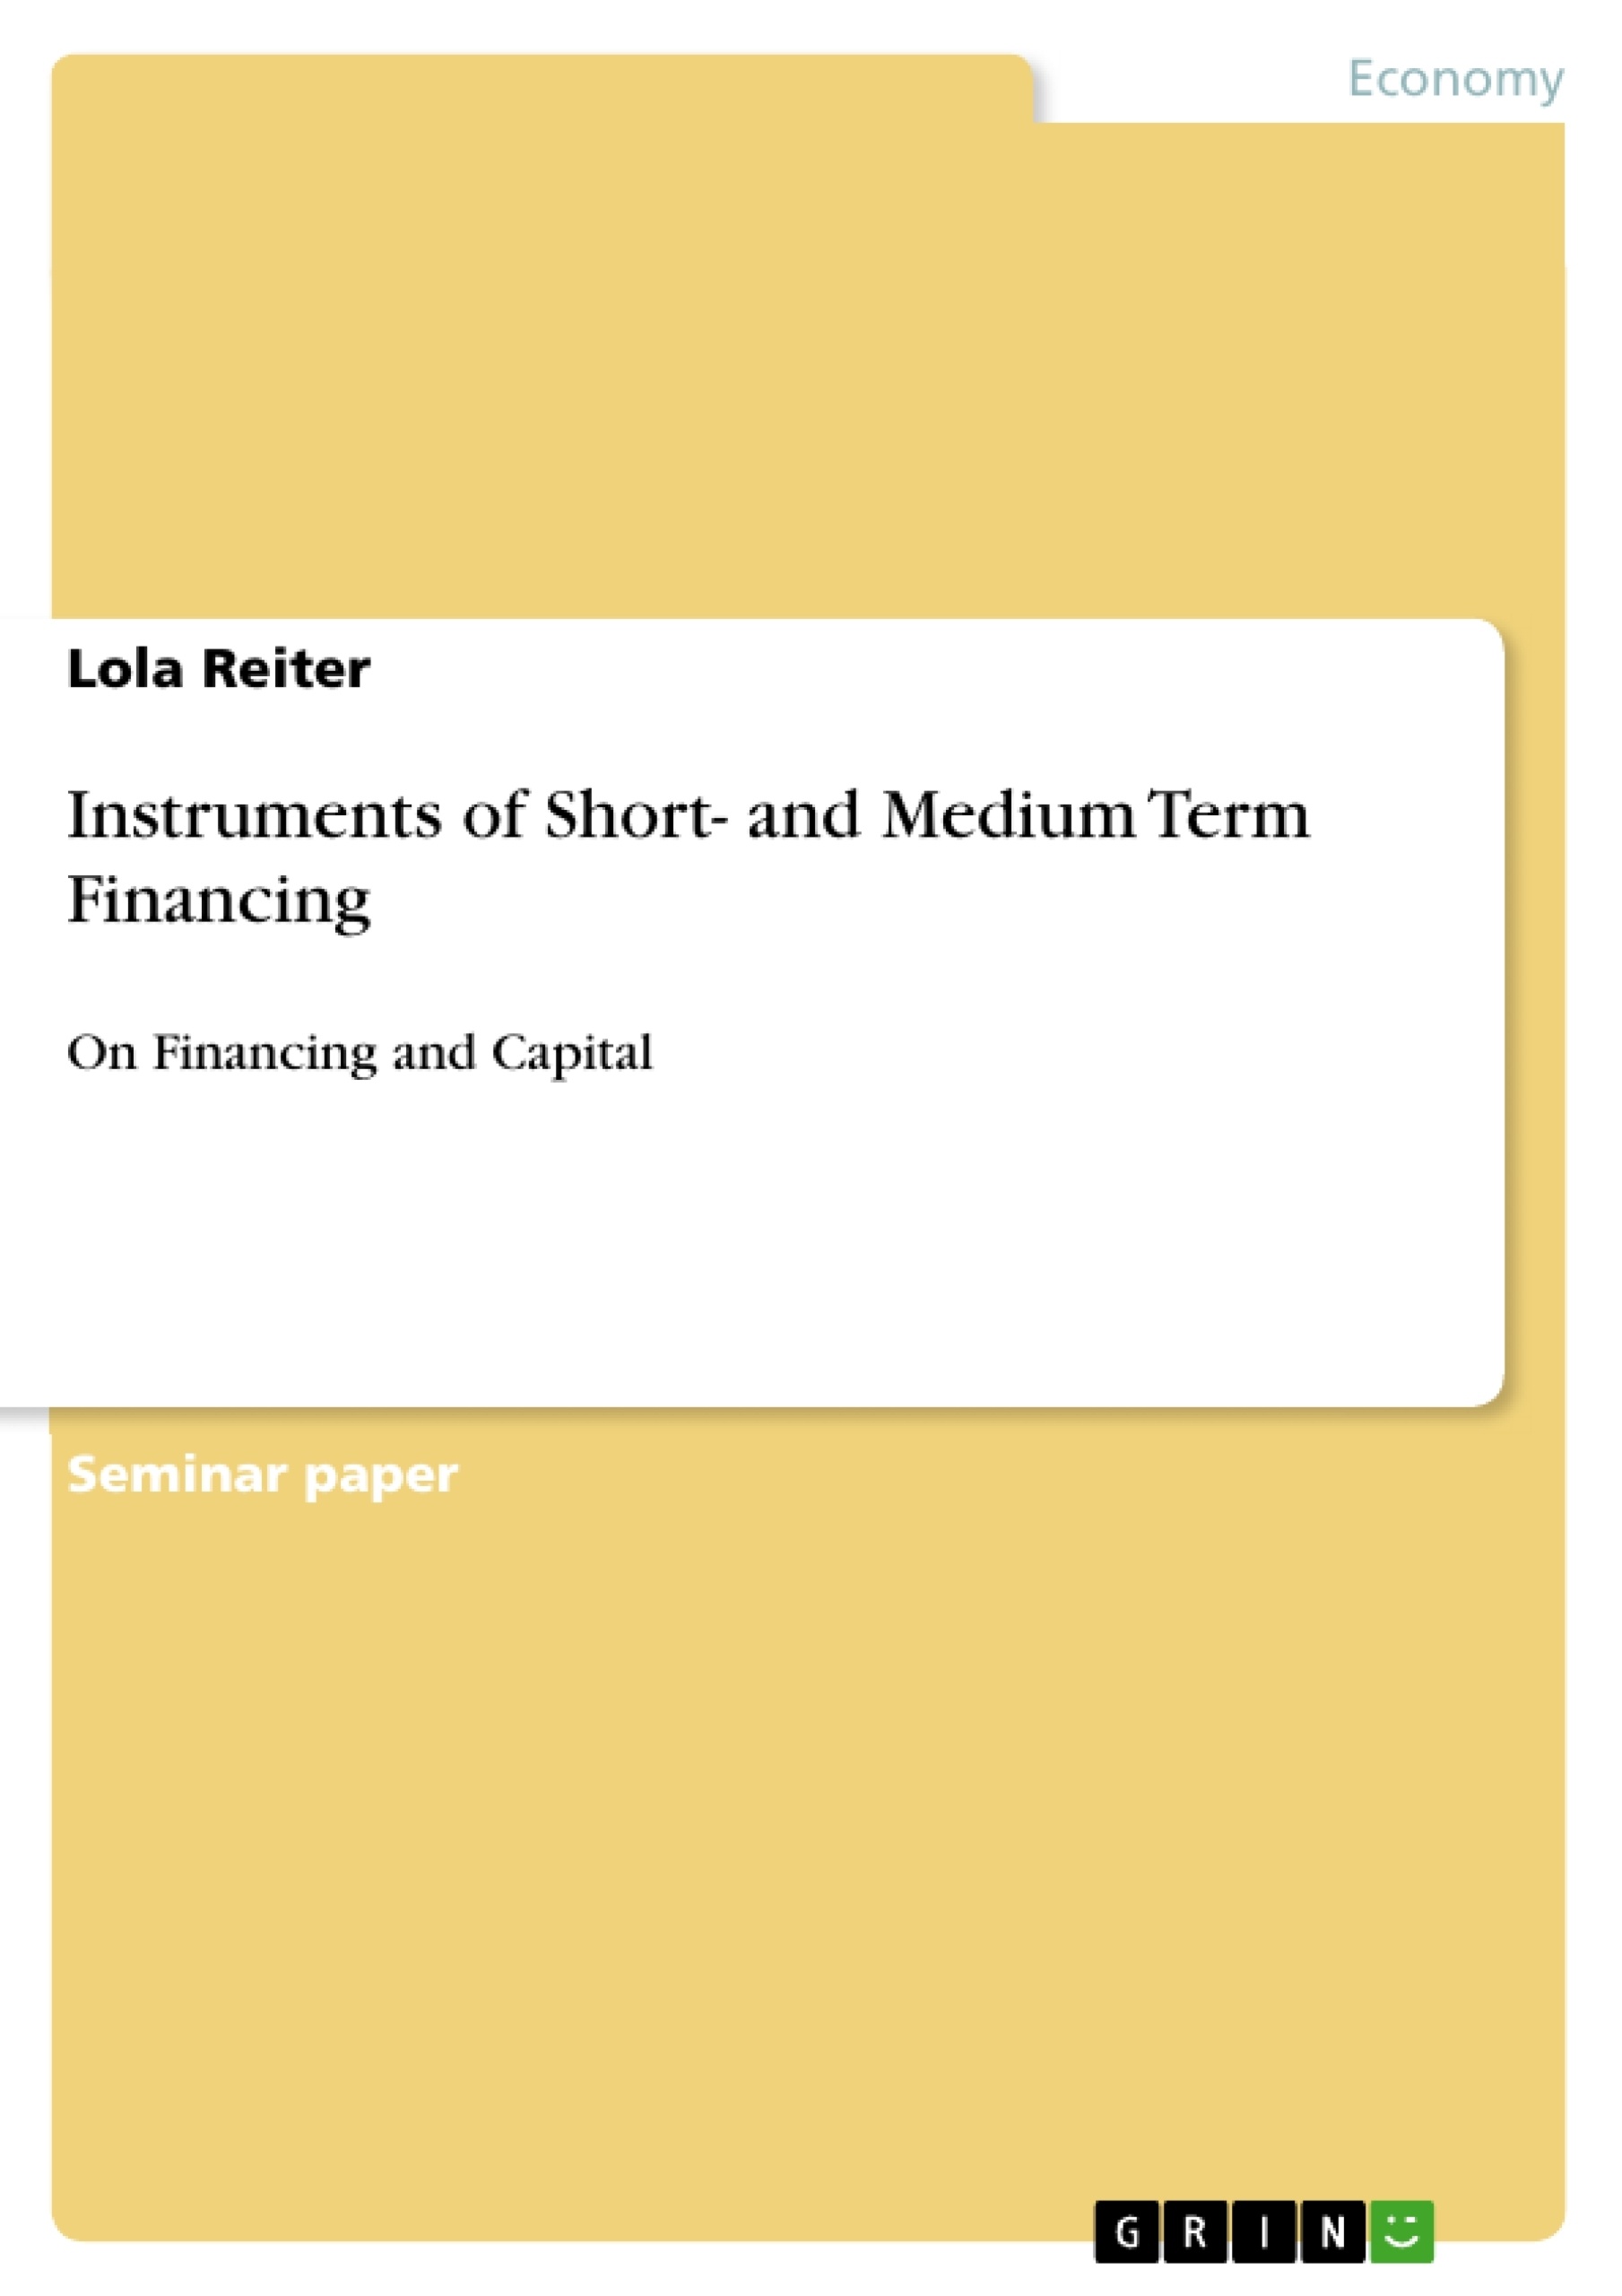 Title: Instruments of Short- and Medium Term Financing